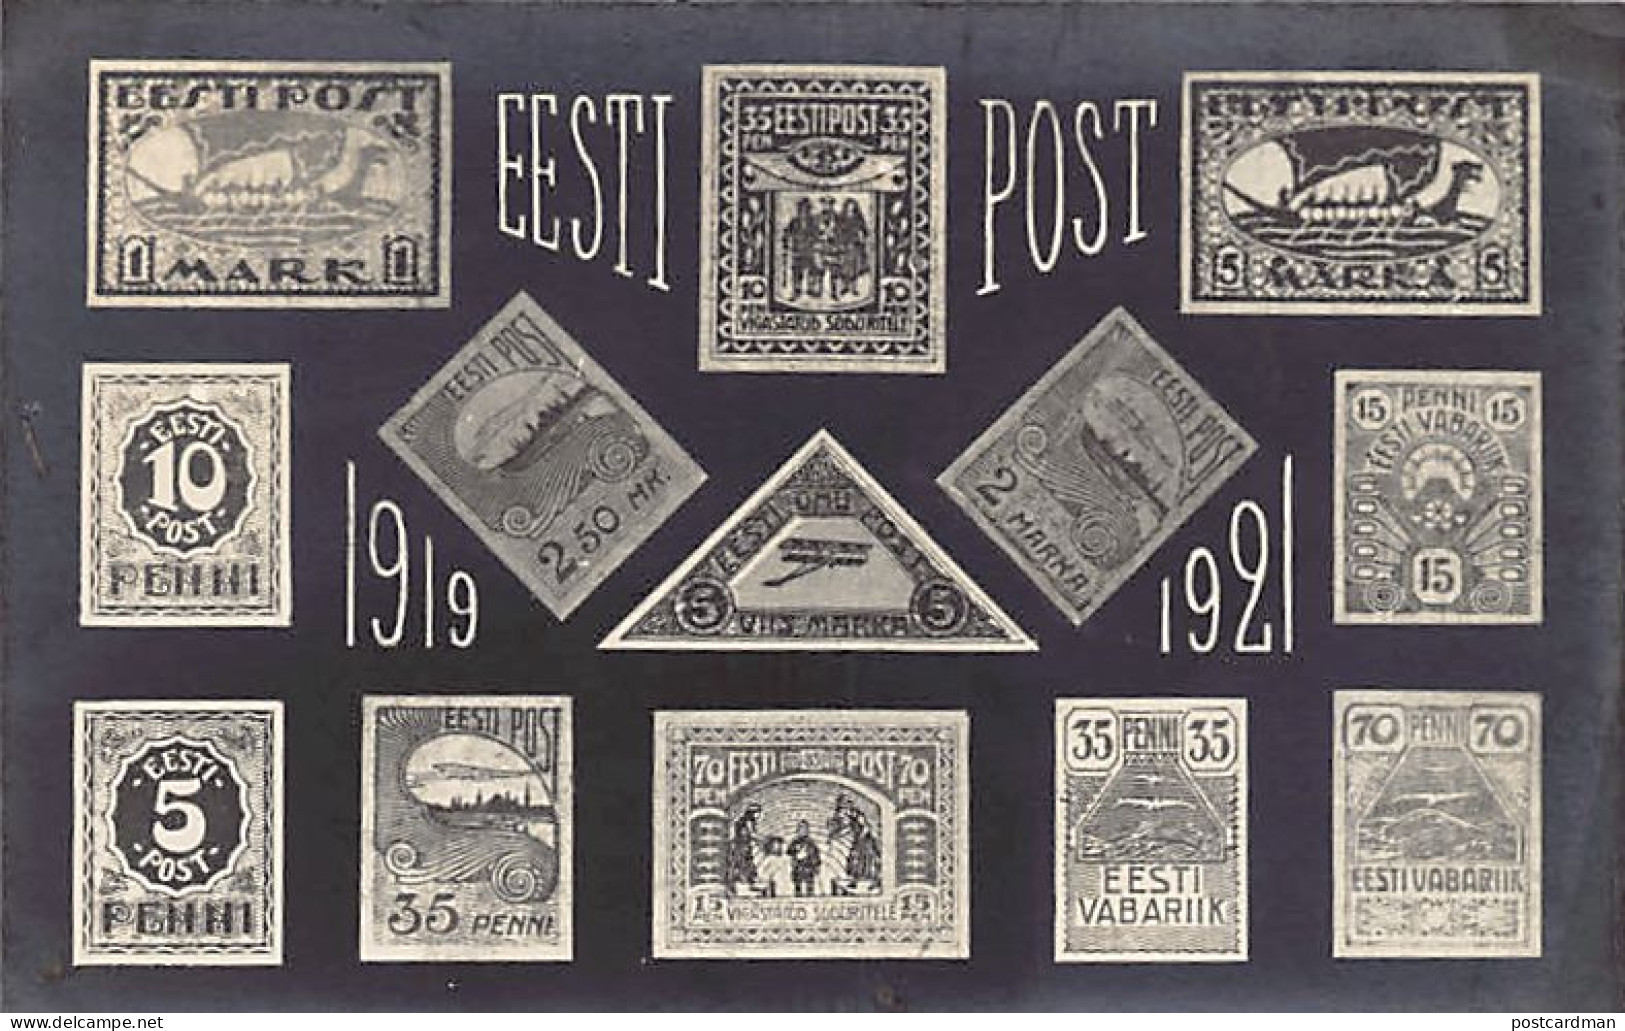 Estonia - Estonian Stamp - Issues From 1919 To 1921 - Publ. Unknown  - Estland